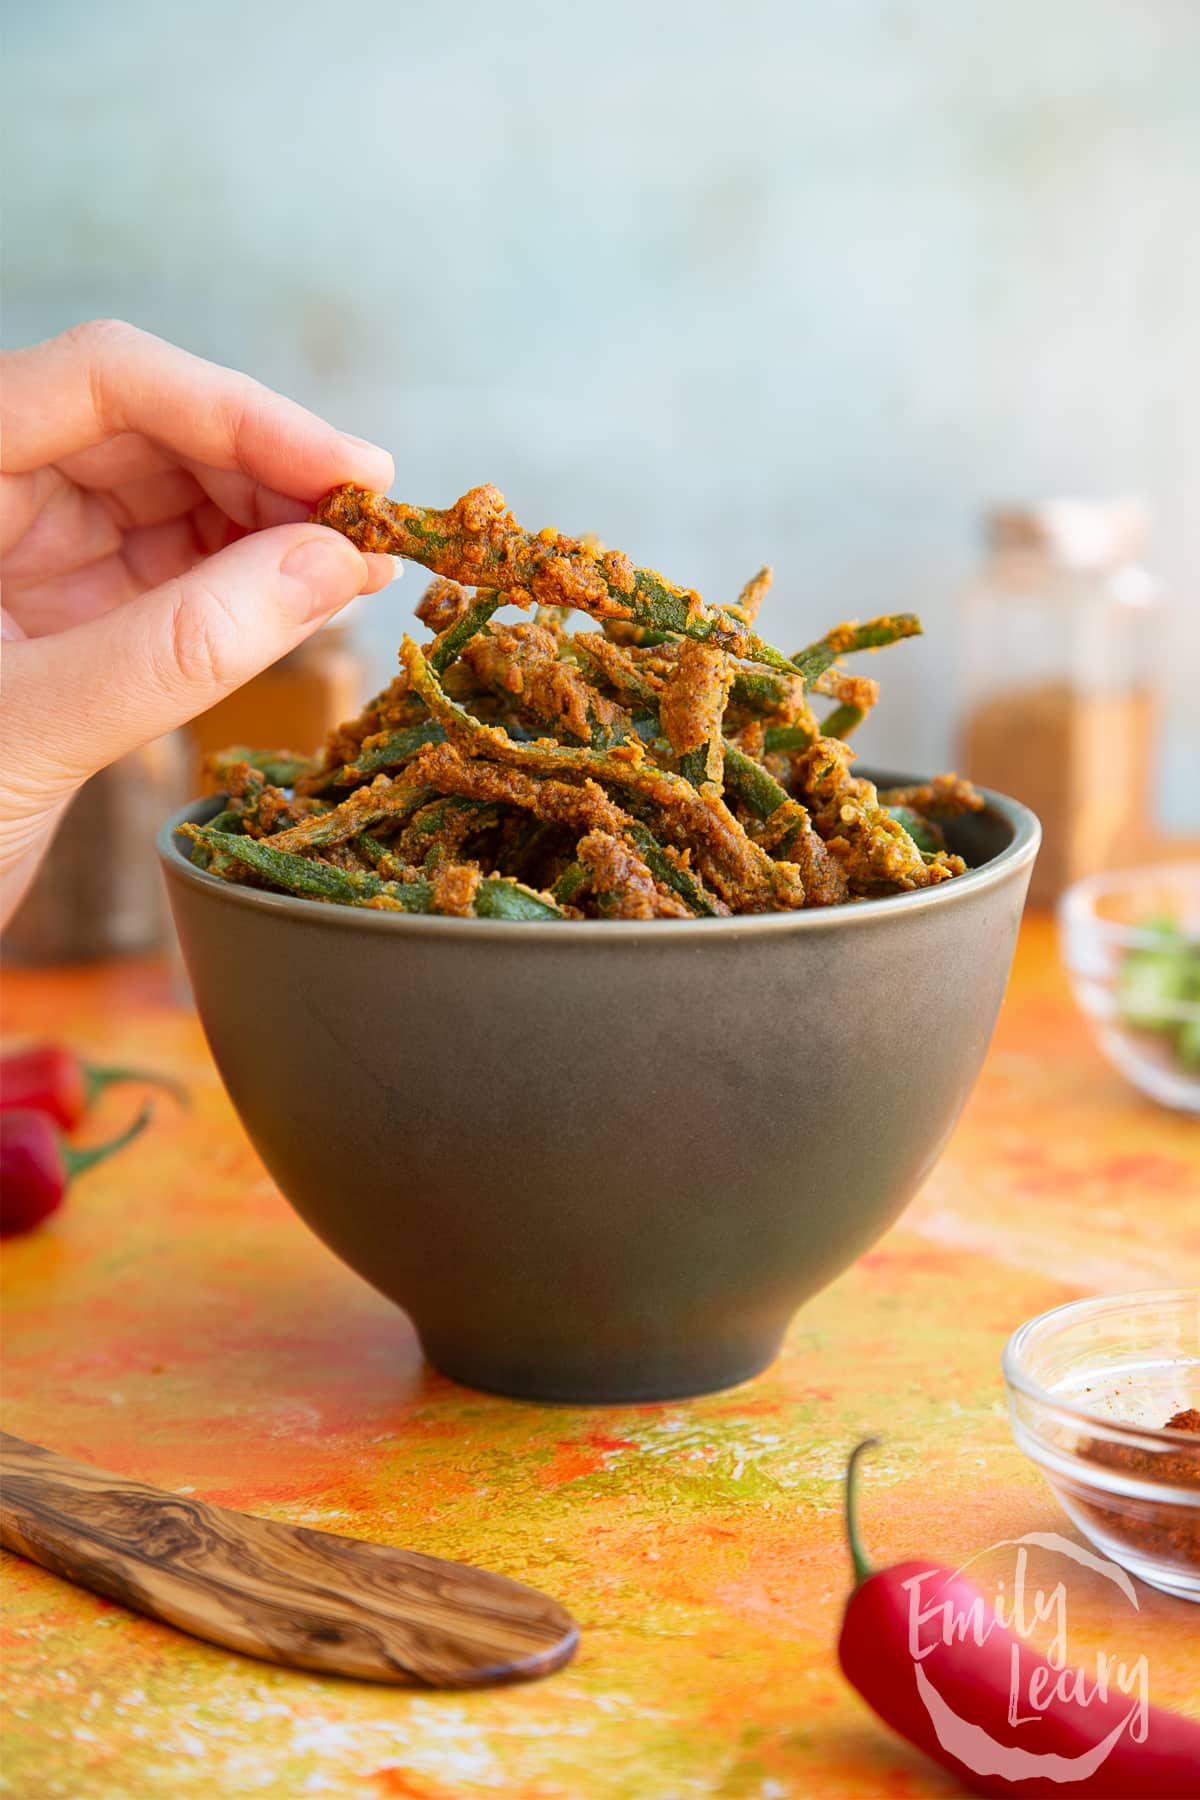 Hand reaching in to grab a finished piece of kurkuri bhindi out of the dark bowl.